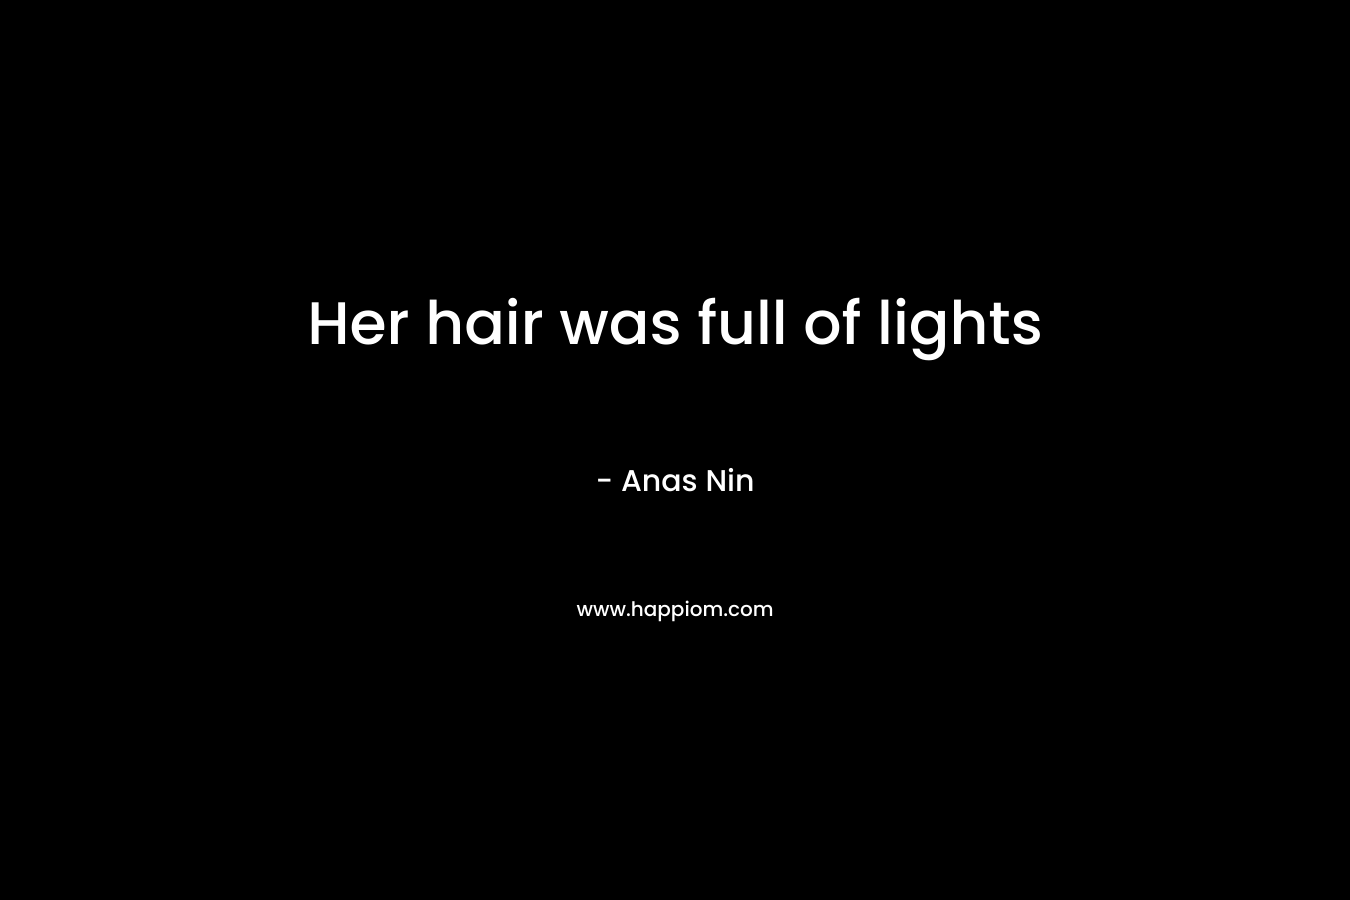 Her hair was full of lights